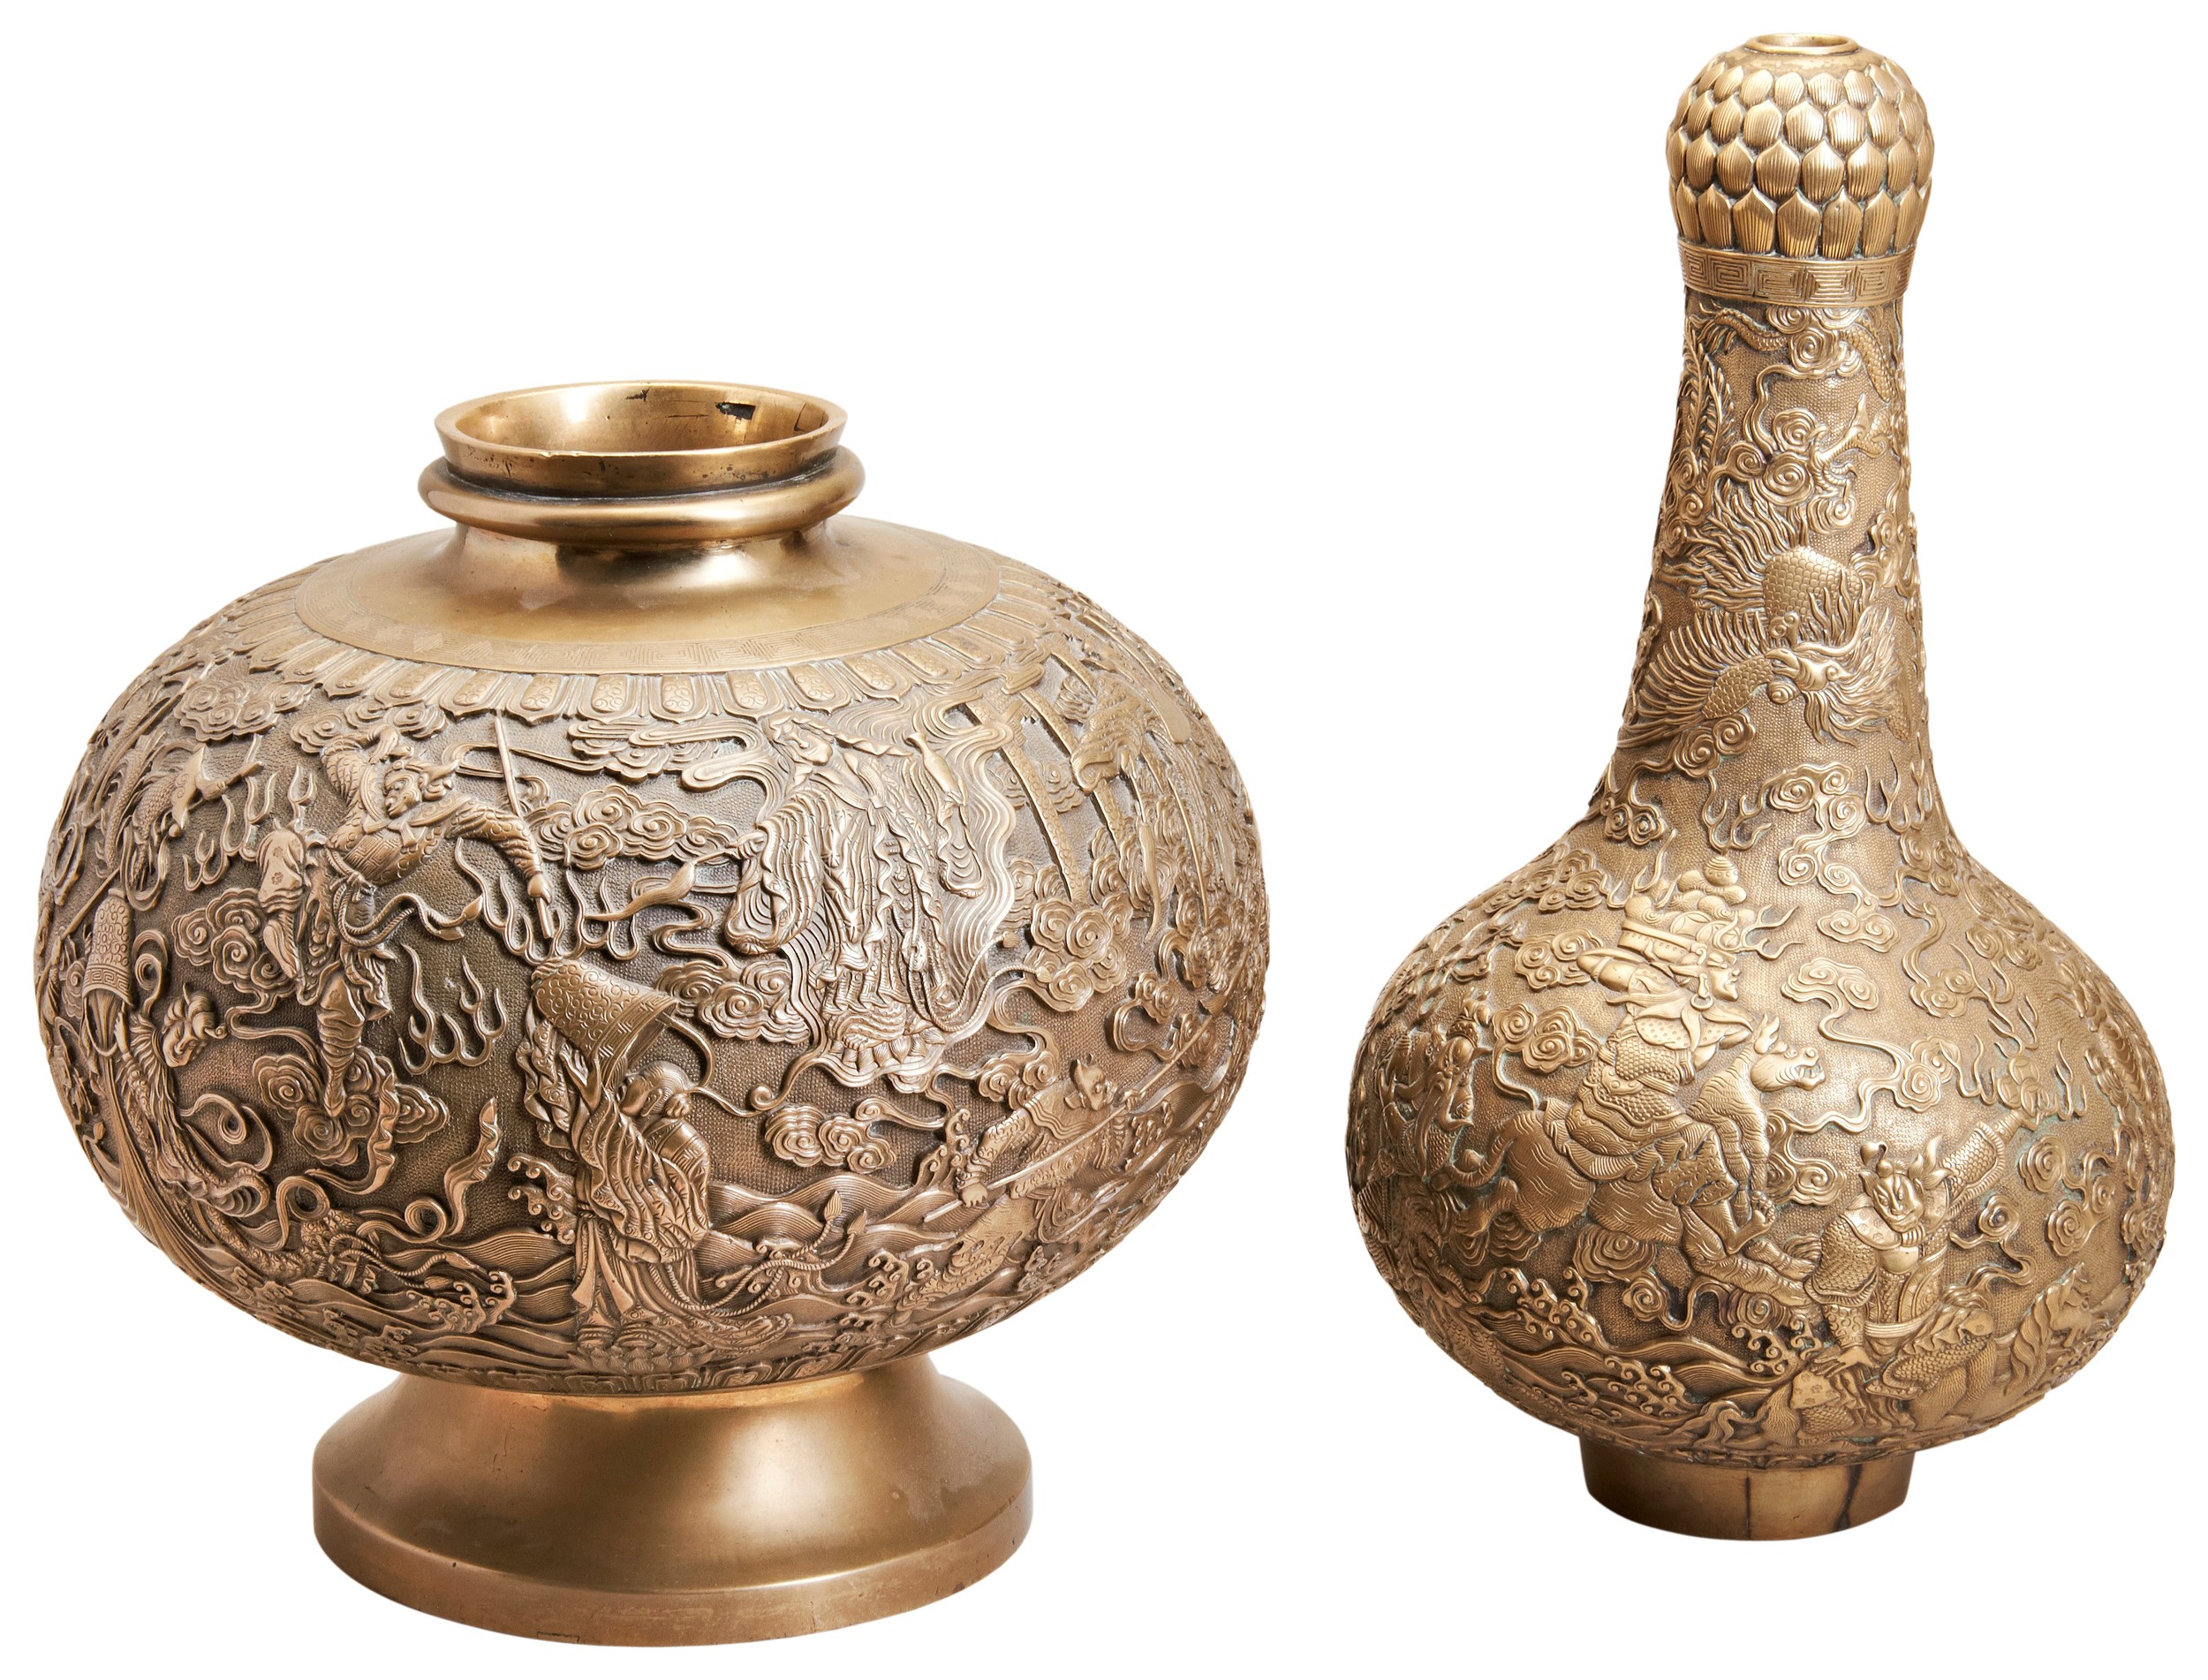 A FINE AND LARGE GILT-BRONZE DOUBLE-GOURD INCENSE BURNER  QING DYNASTY, 18TH / 19TH CENTURY 清 - Bild 5 aus 5